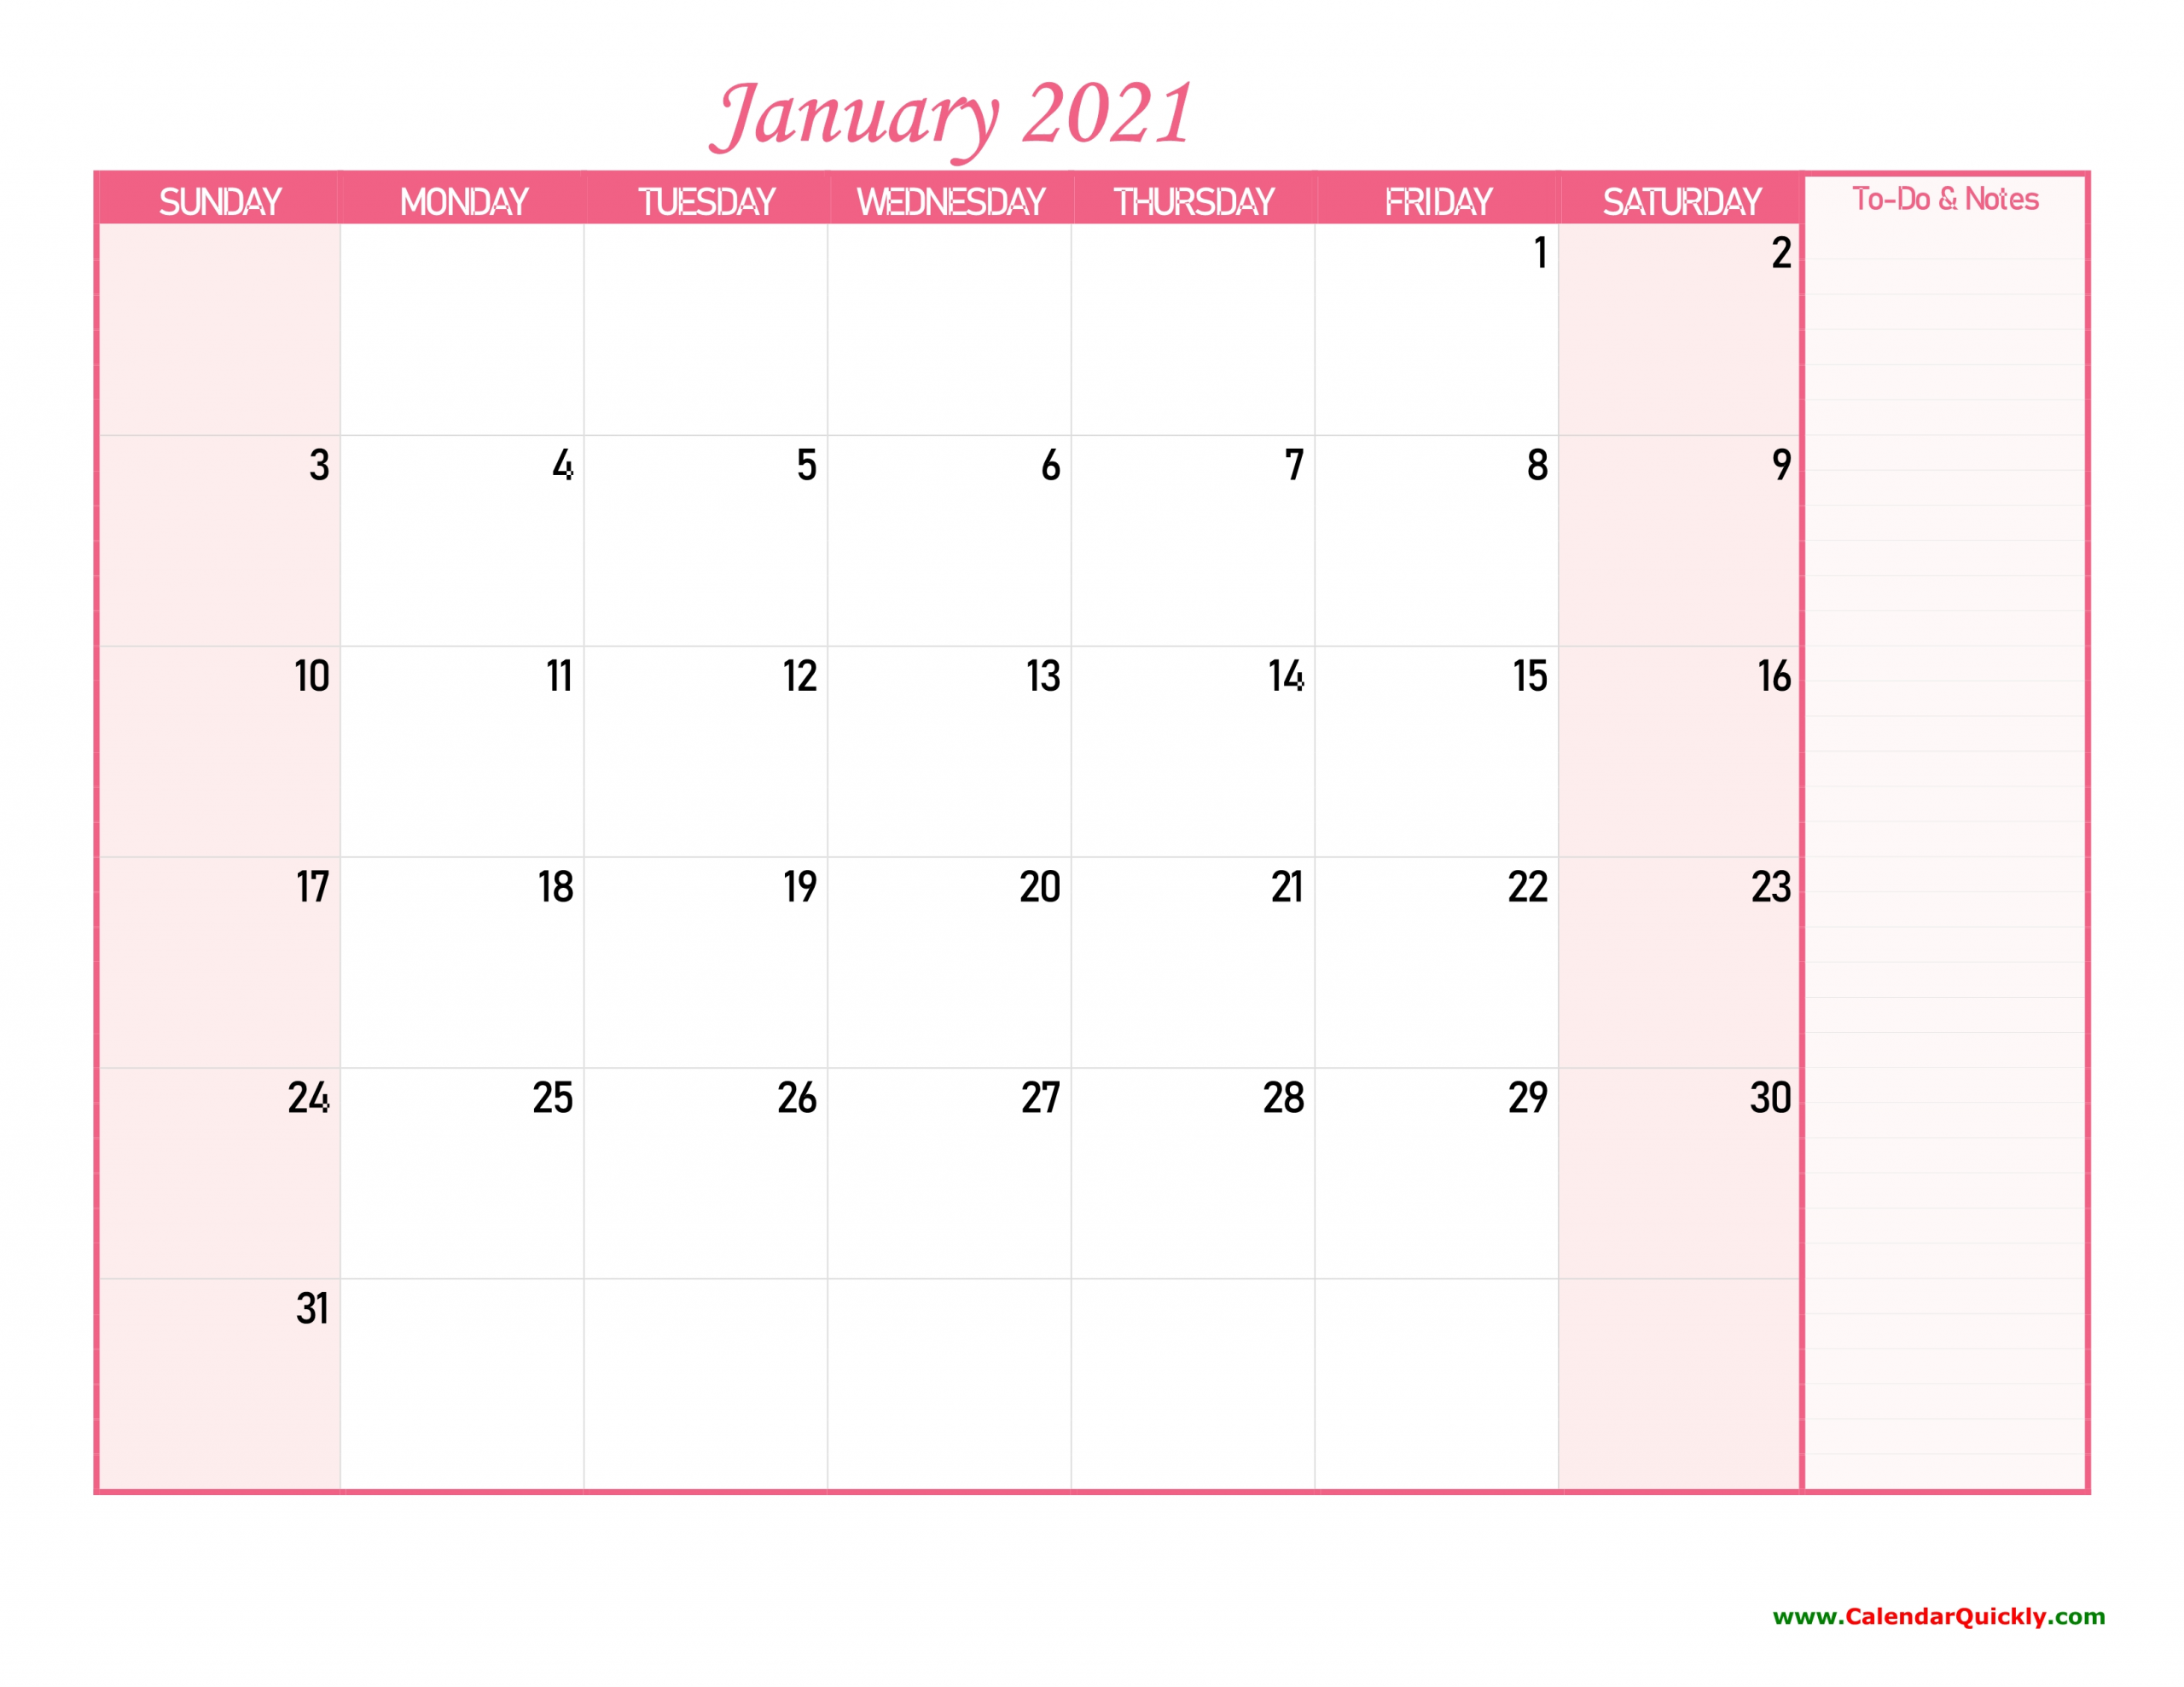 monthly calendar 2021 with notes | calendar quickly